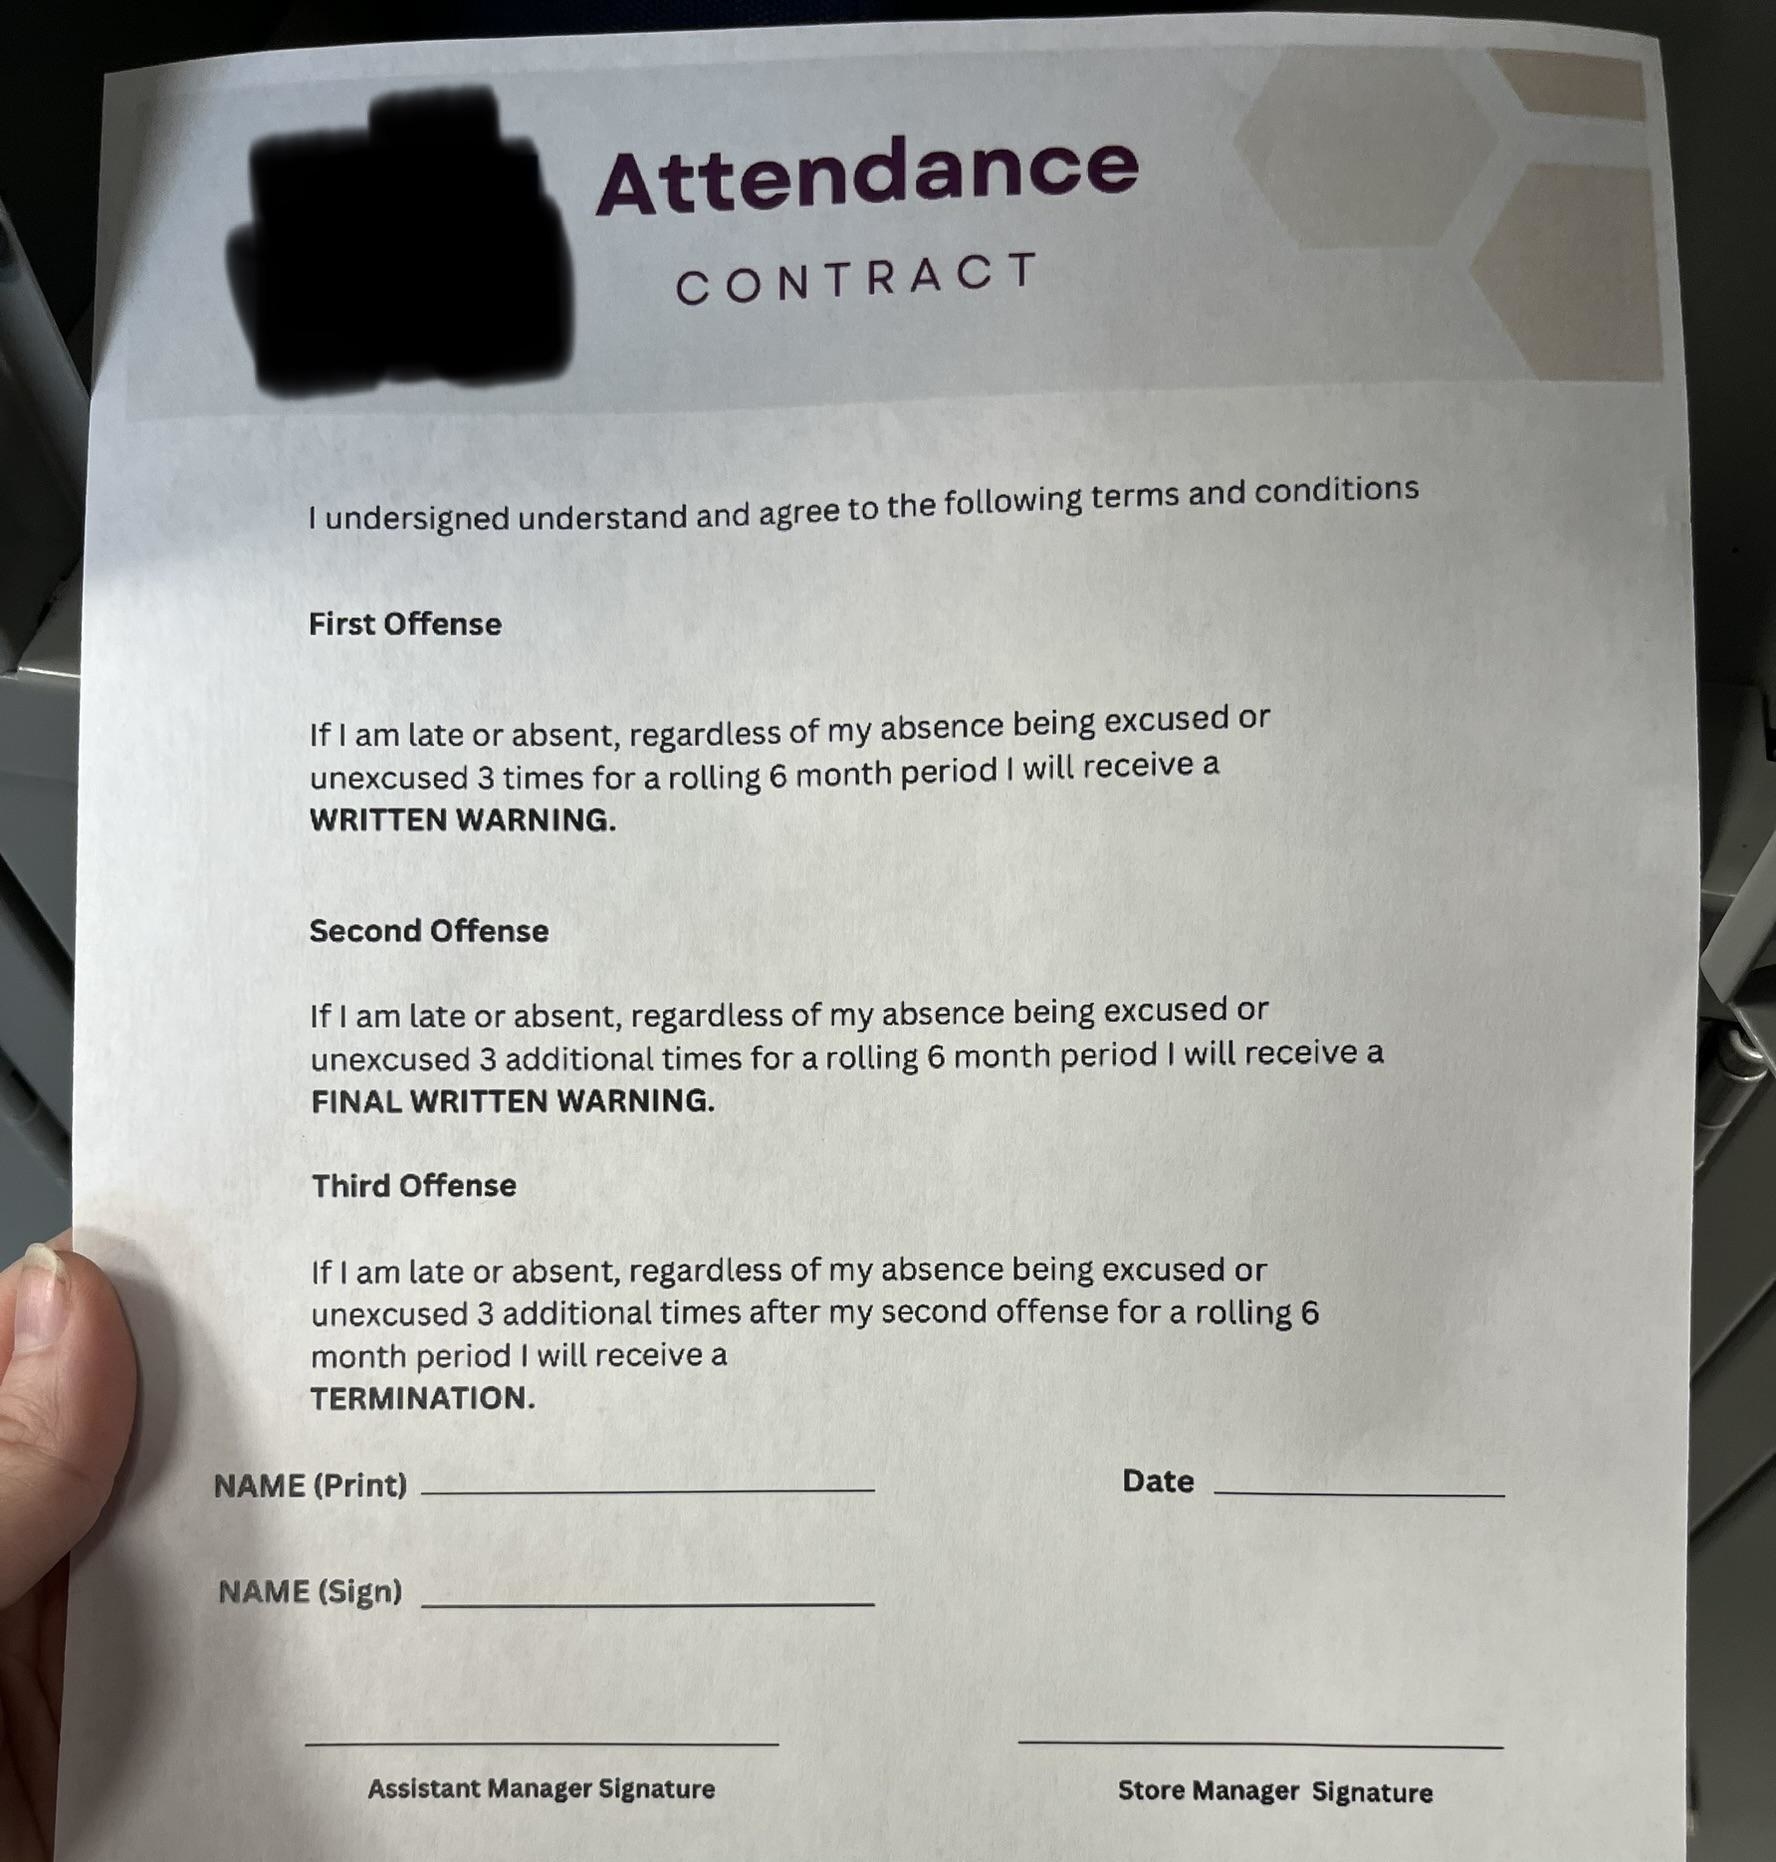 A contract for attendance